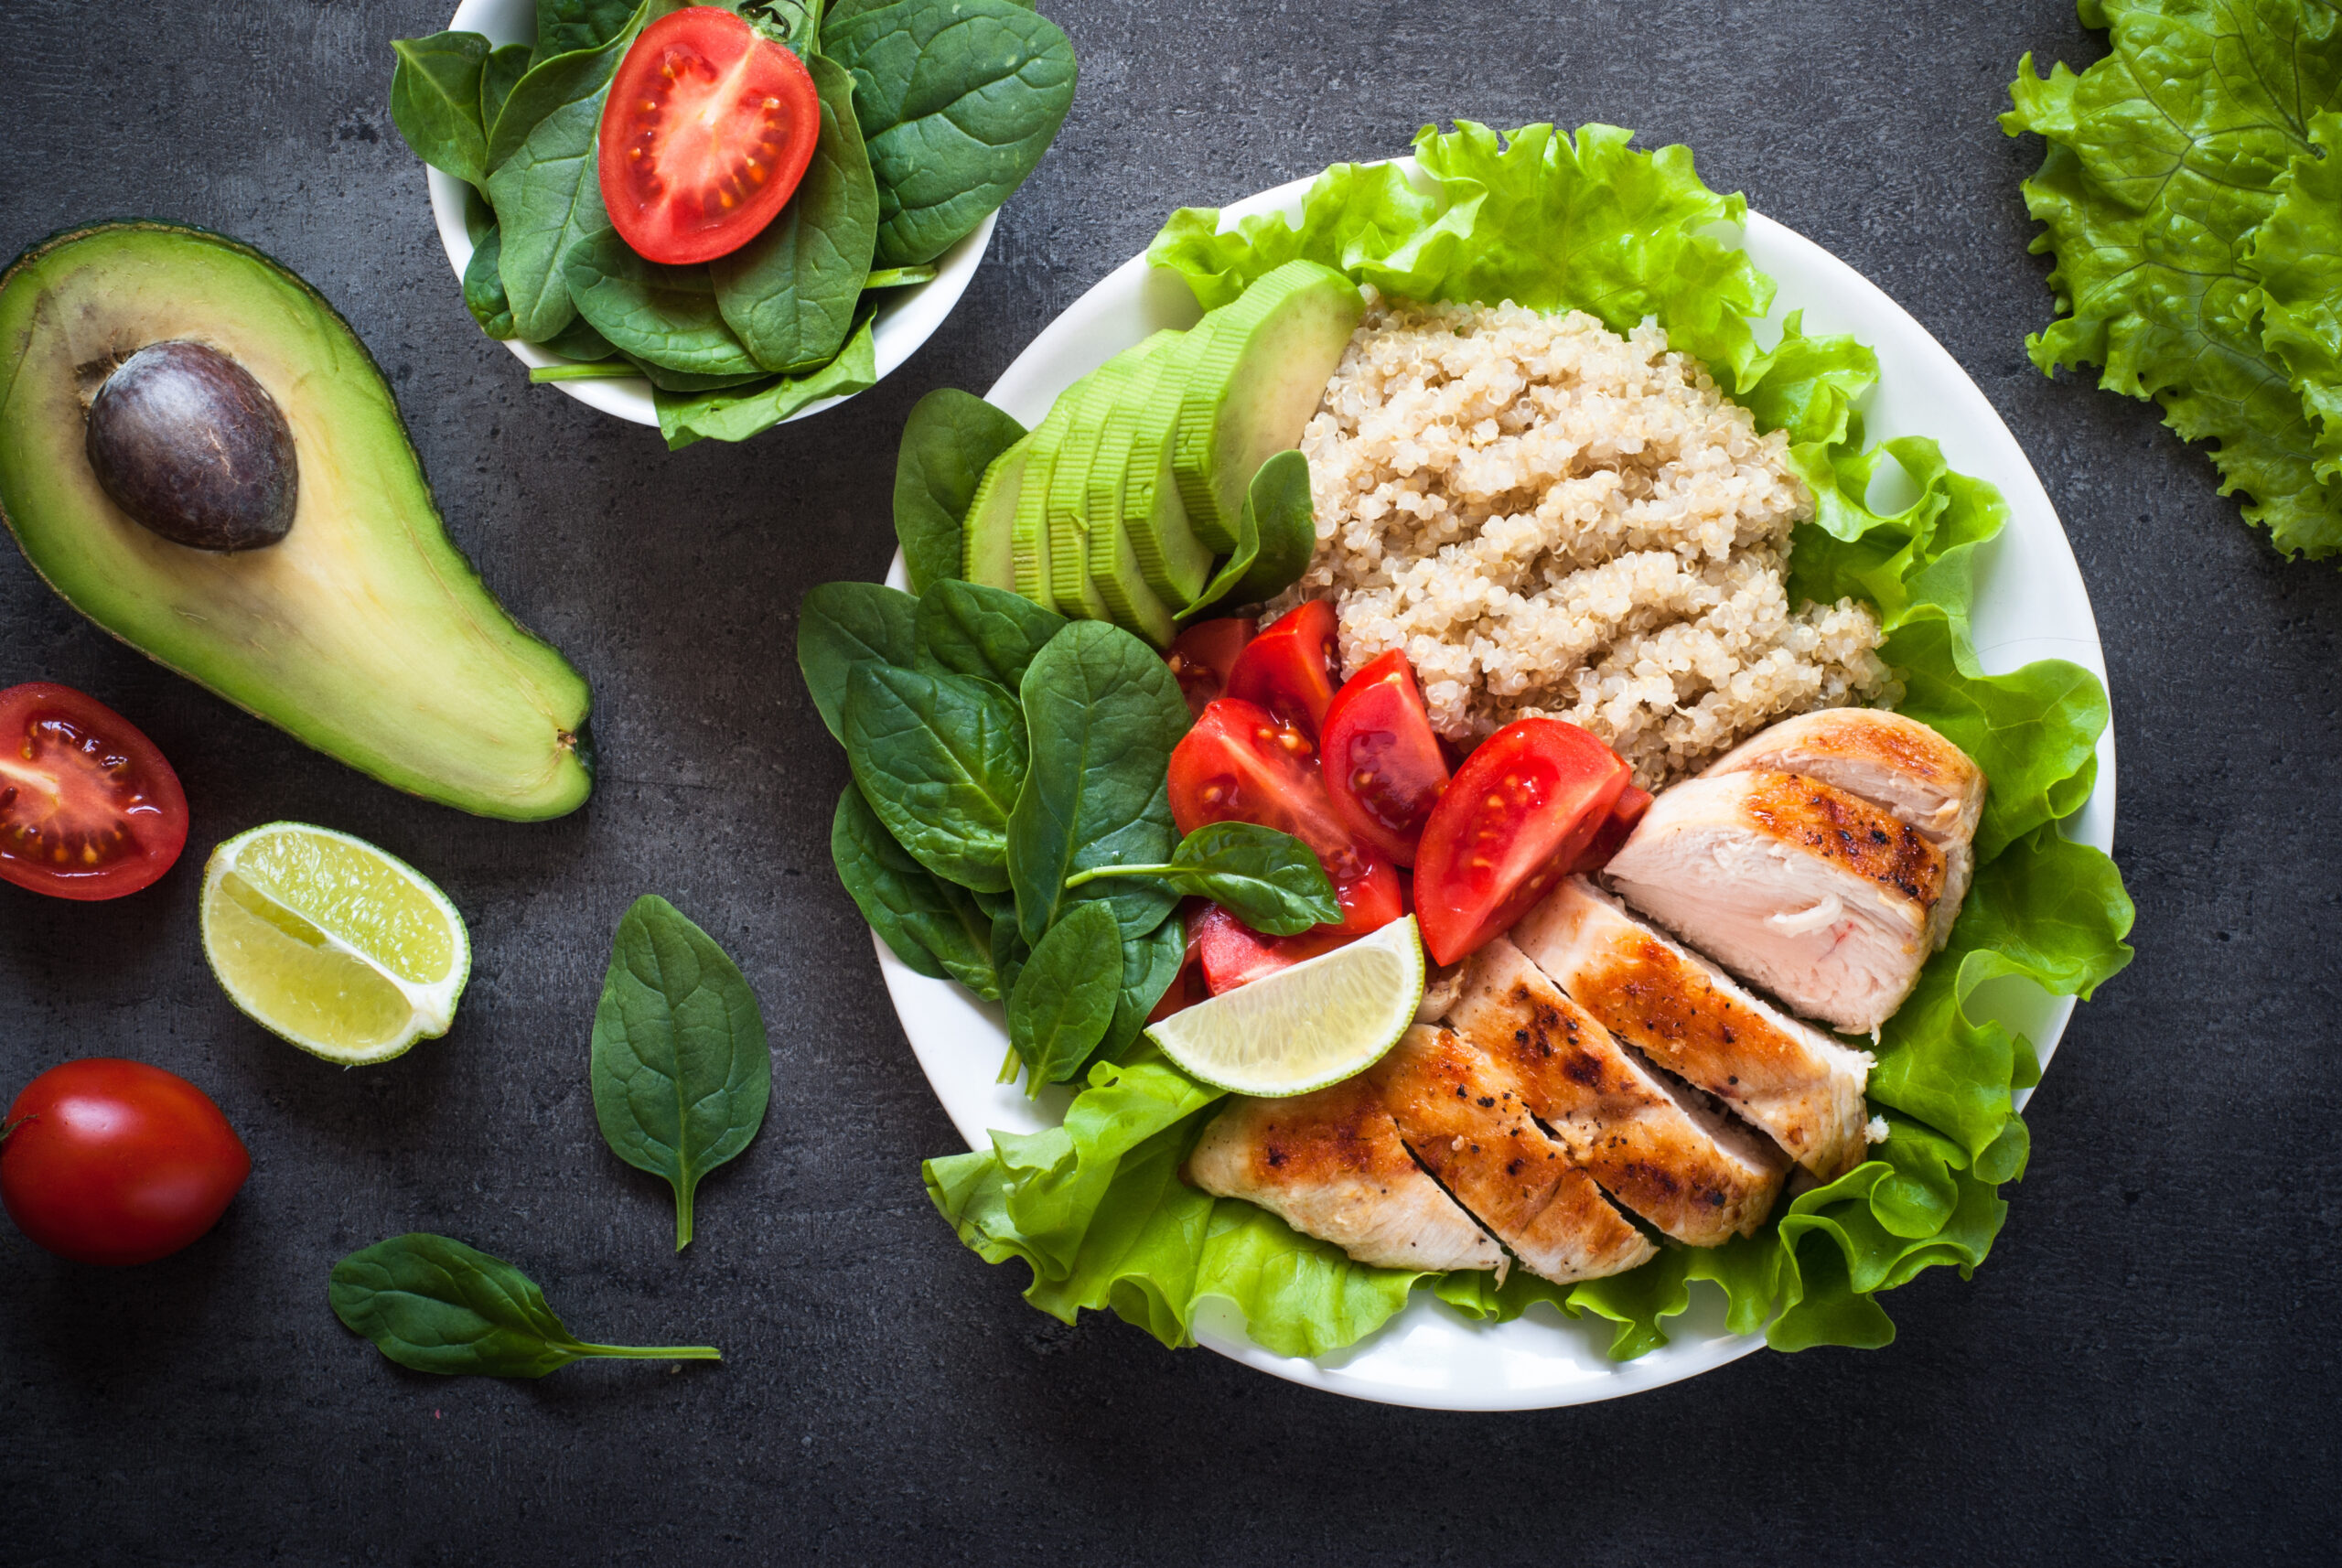 A salad is set on a white plate with chicken, tomatoes, quinoa and avocados on a dark table.